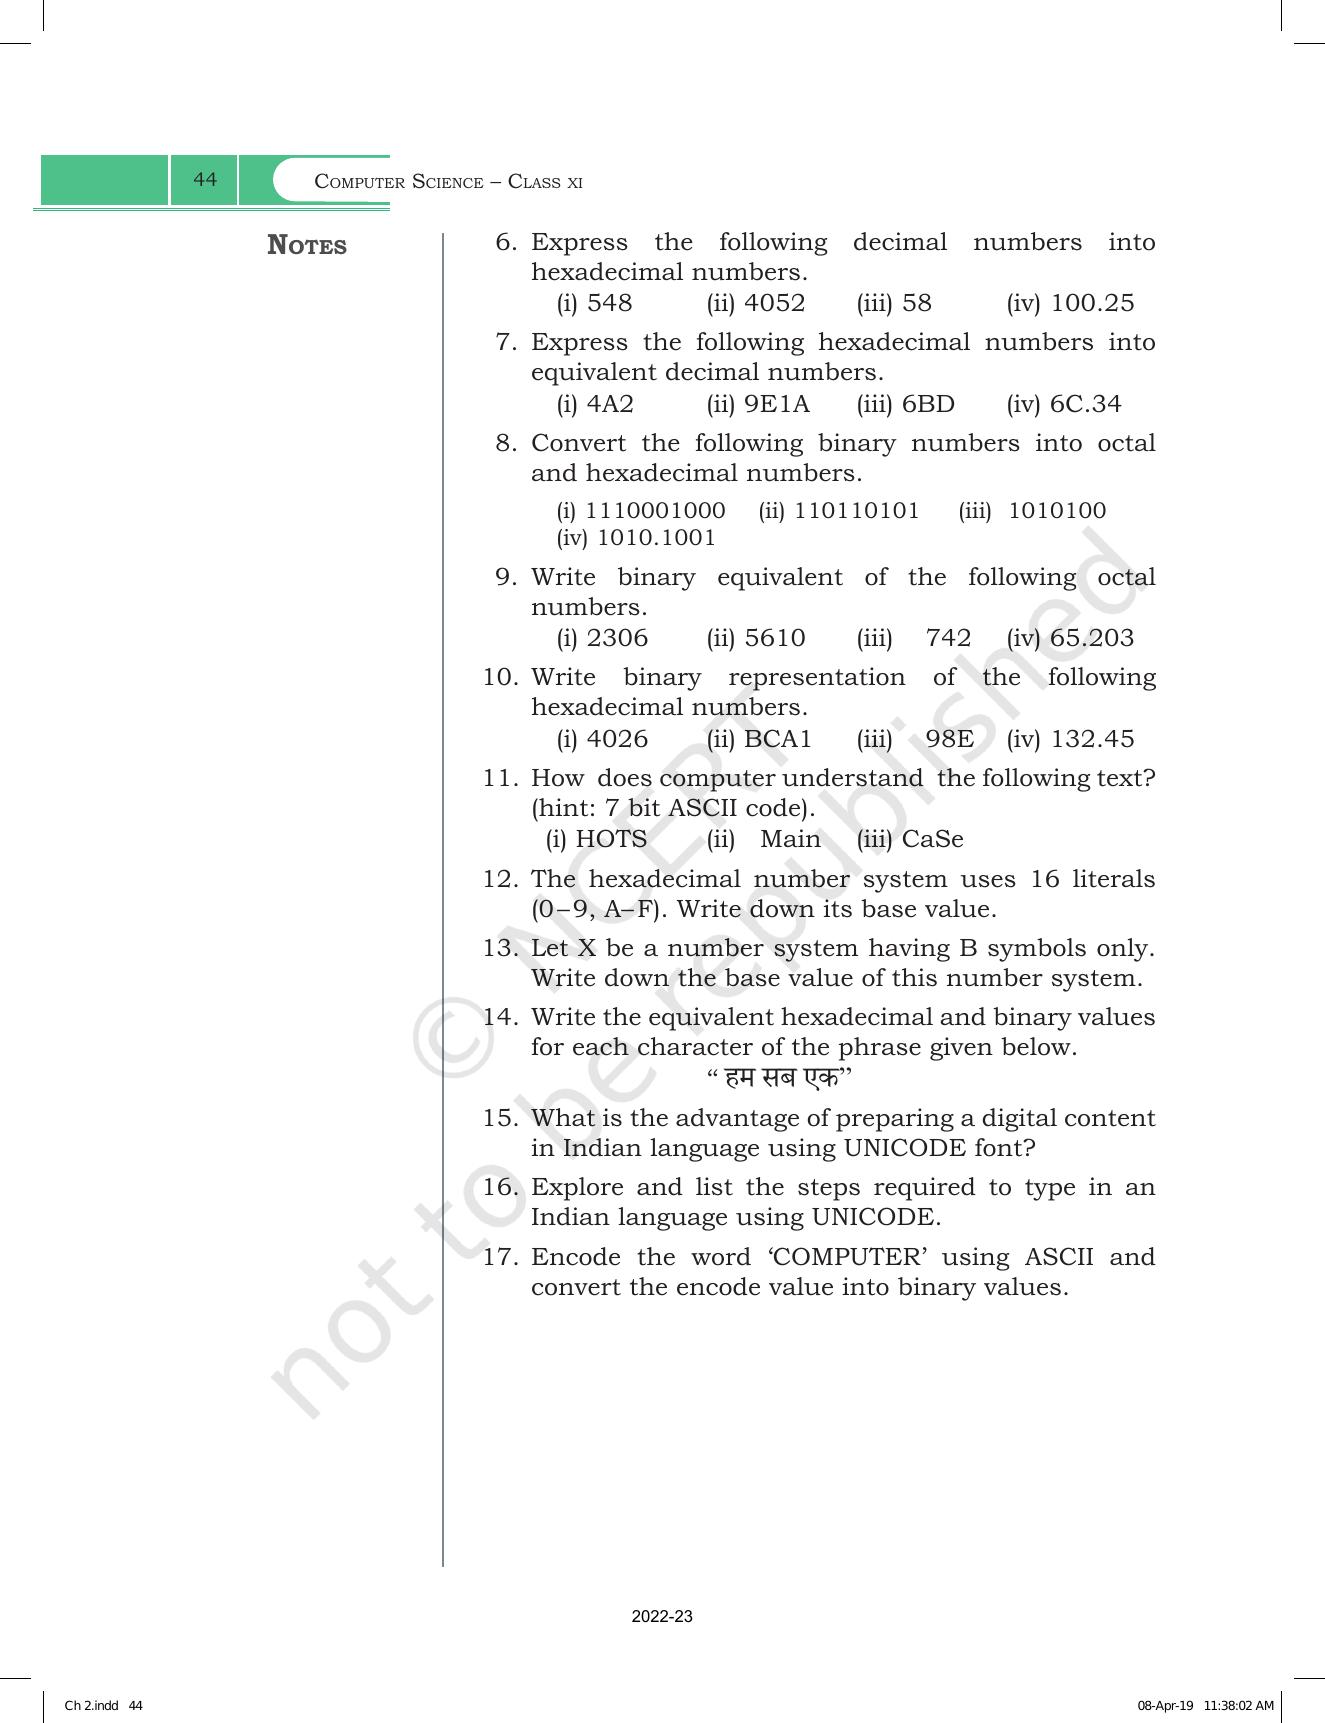 NCERT Book for Class 11 Computer Science Chapter 2 Encoding Schemes and Number System - Page 18